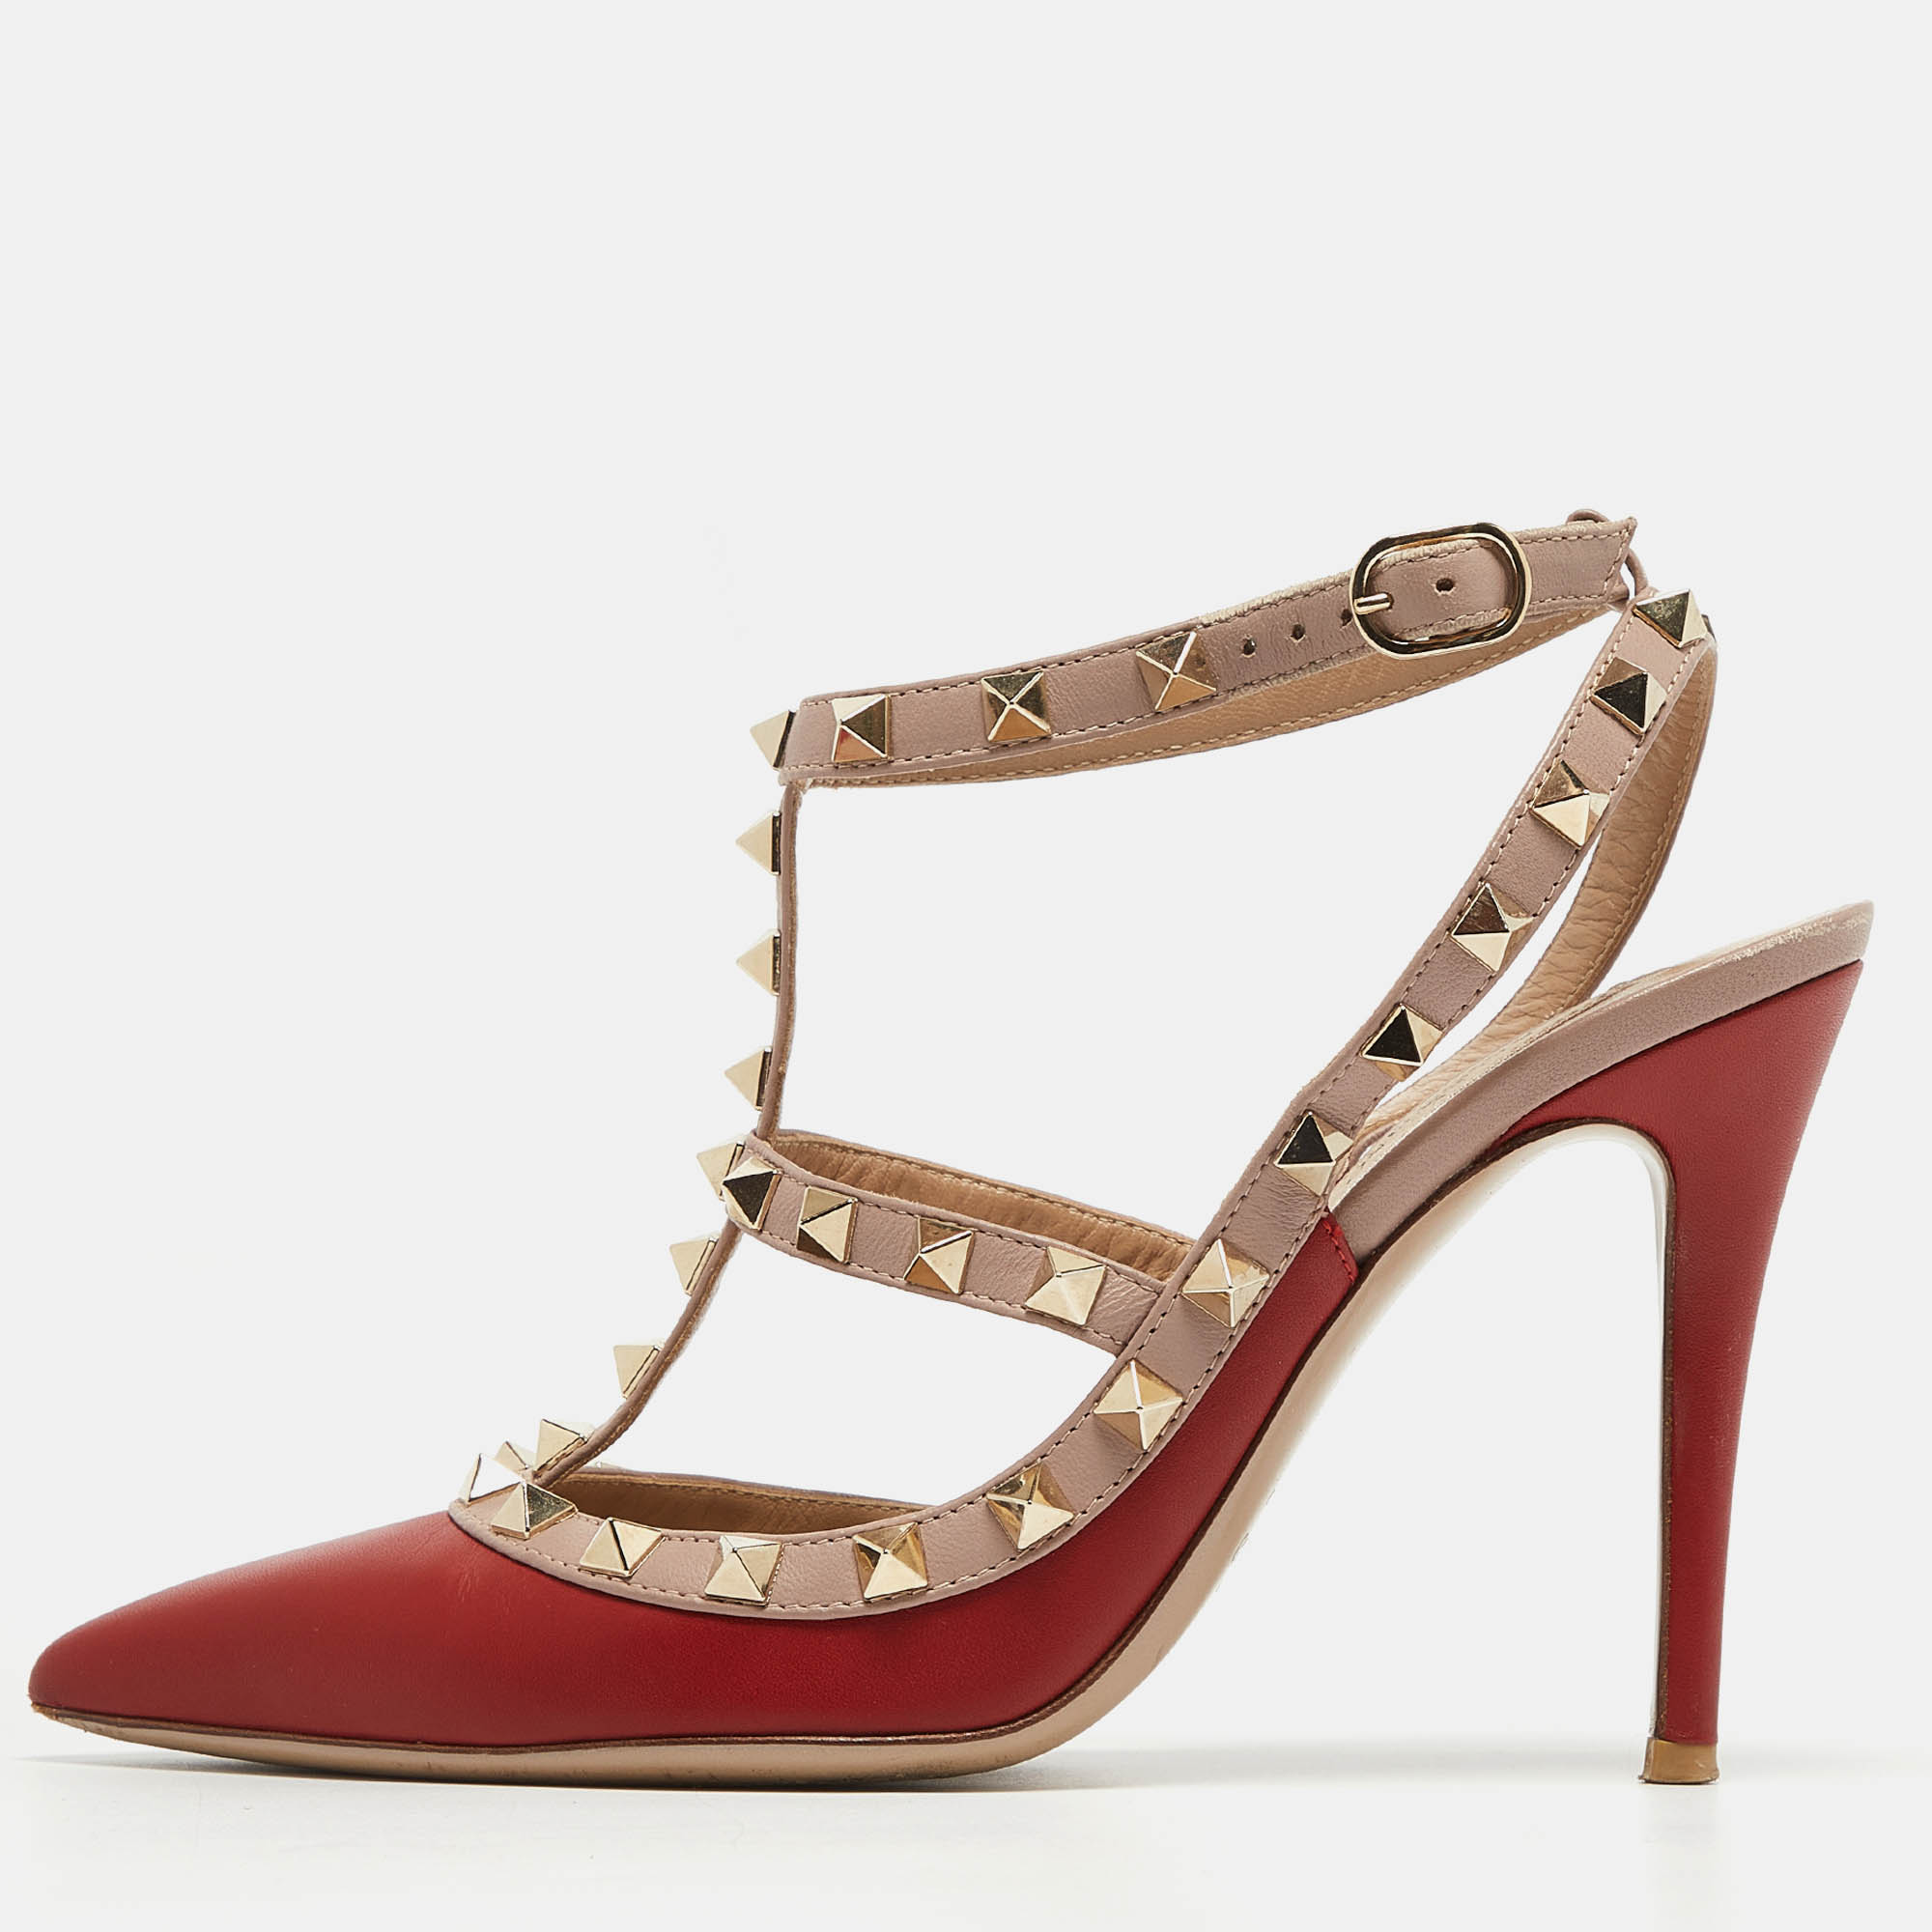 Valentino red/dusty pink leather rockstud ankle strap pumps size 37